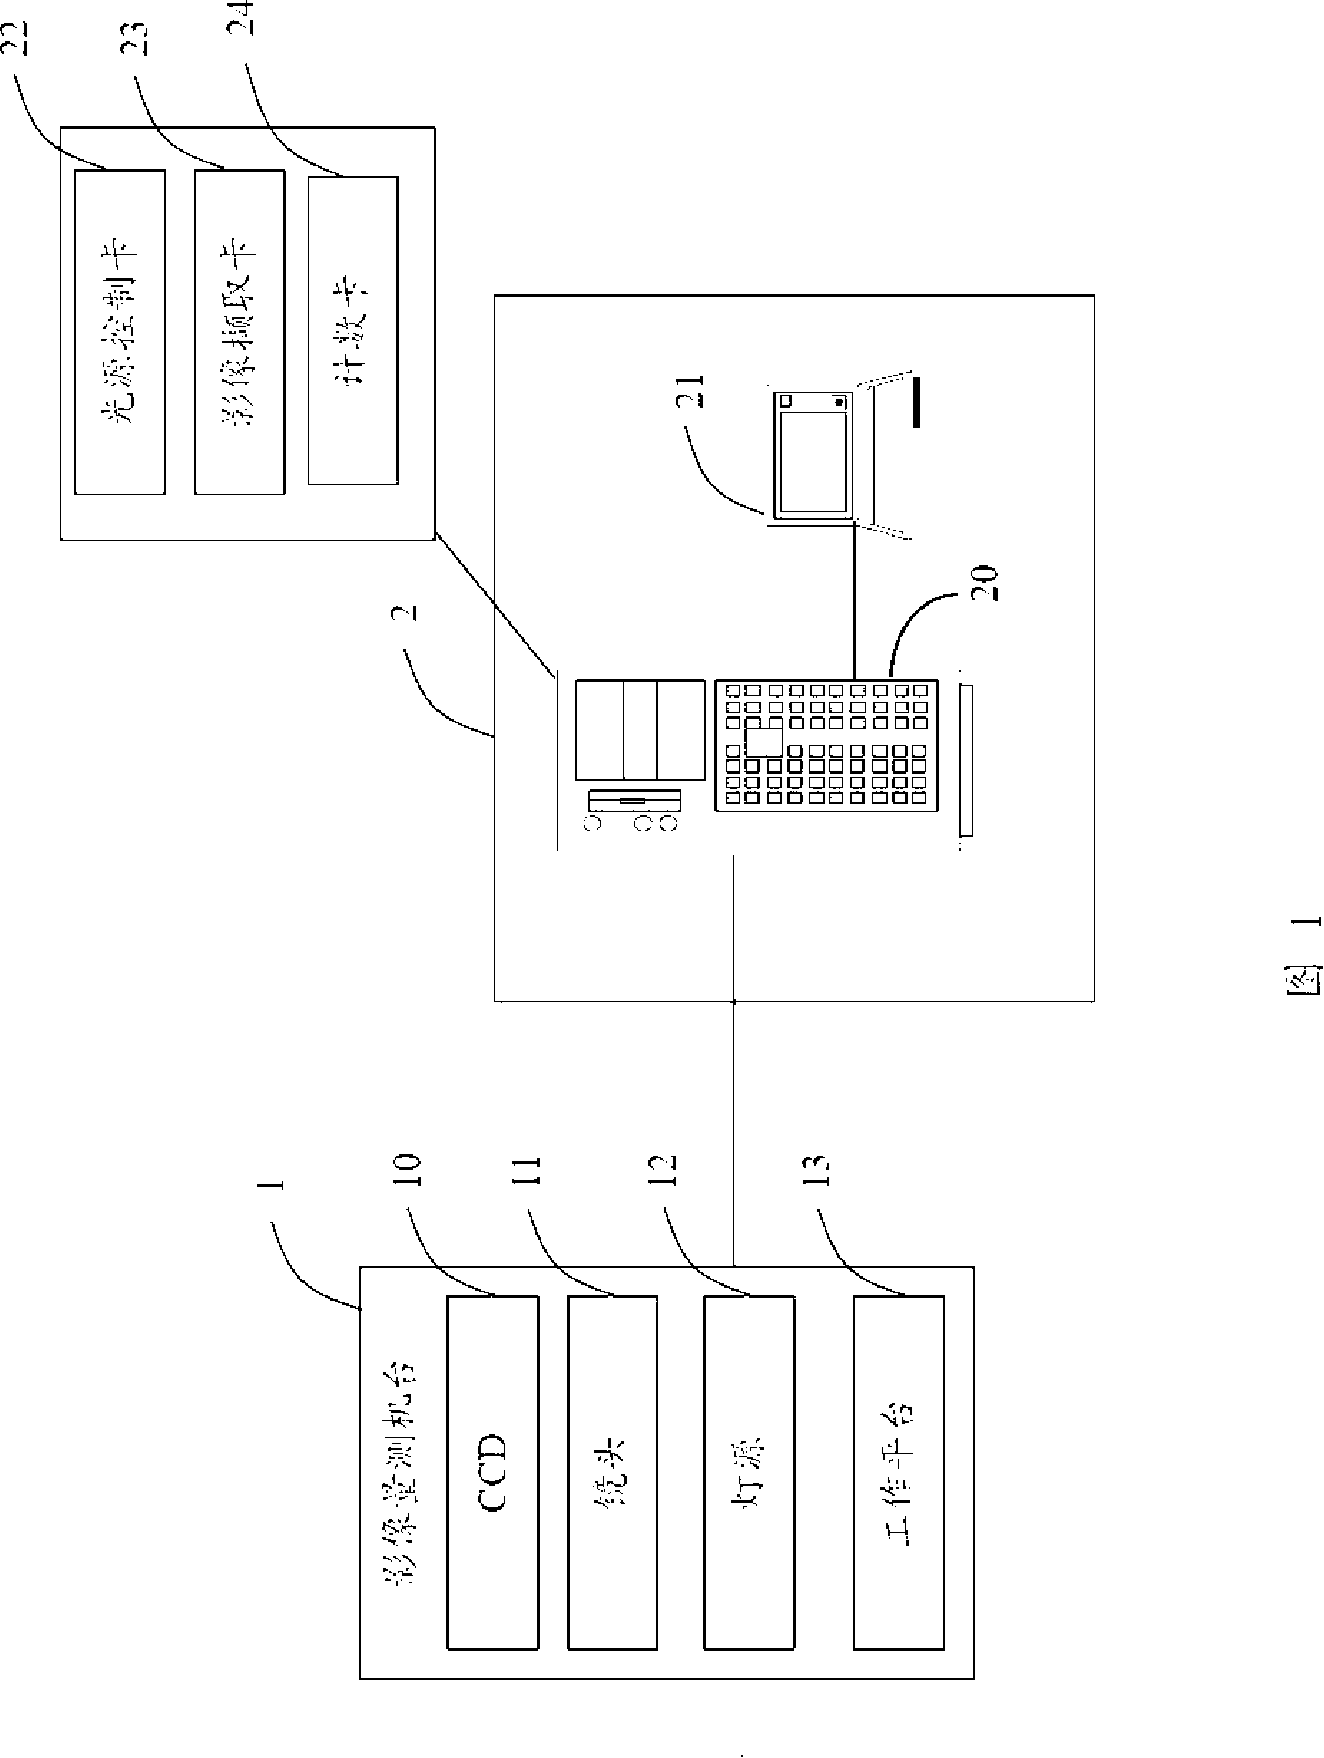 Image measuring system and method